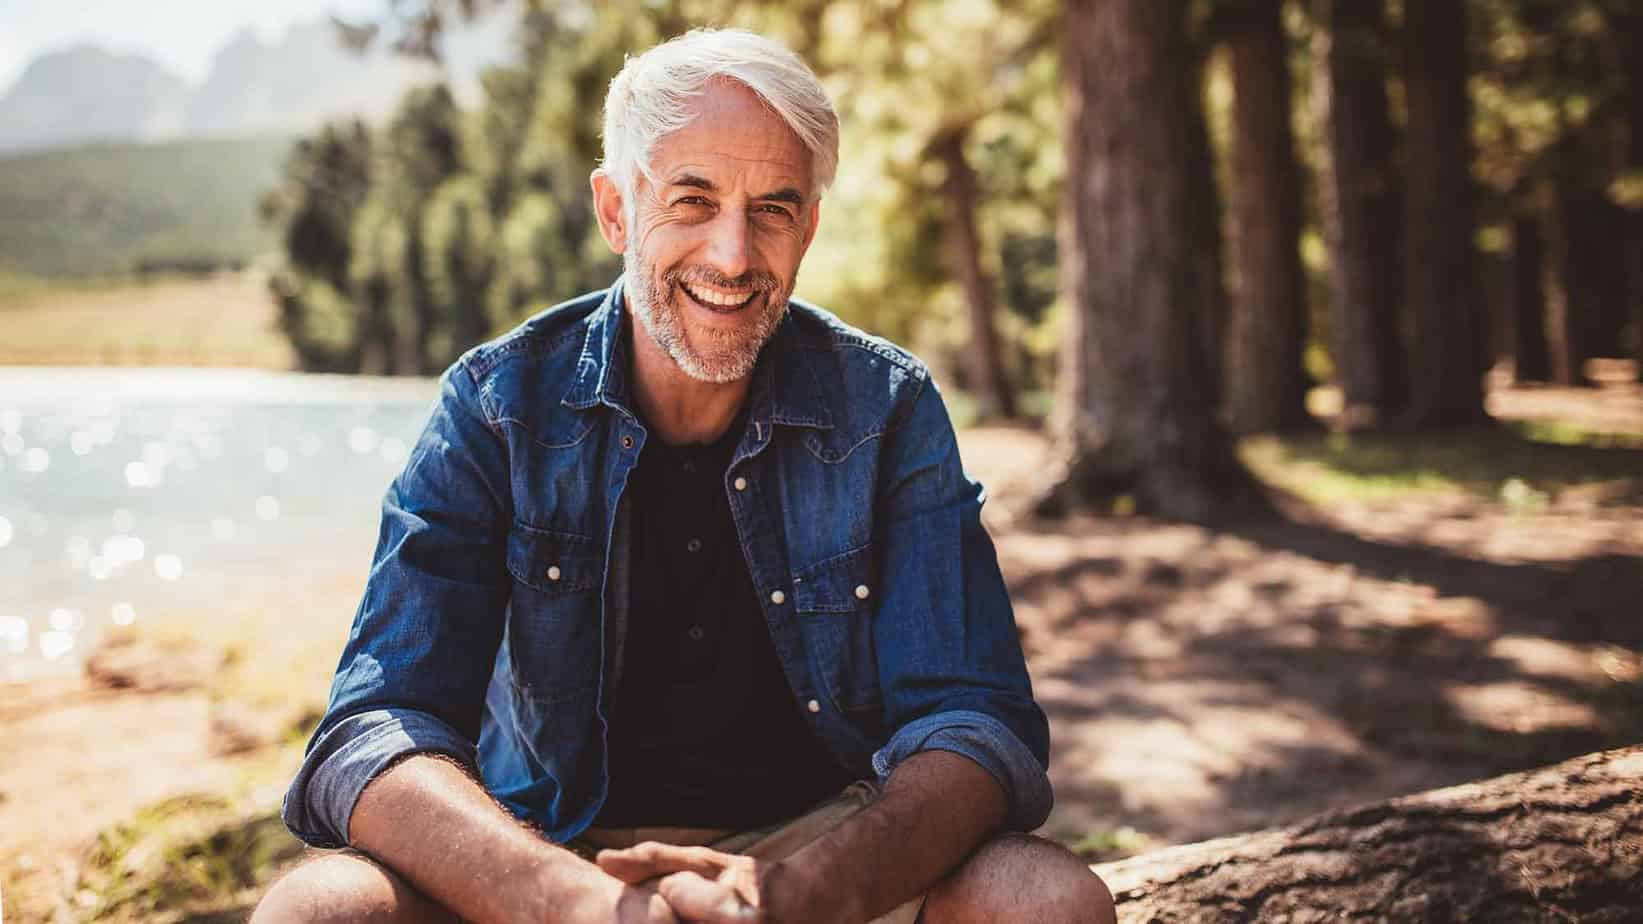 Older white haired man with denim shirt and shorts smiling sitting on log by lake and trees